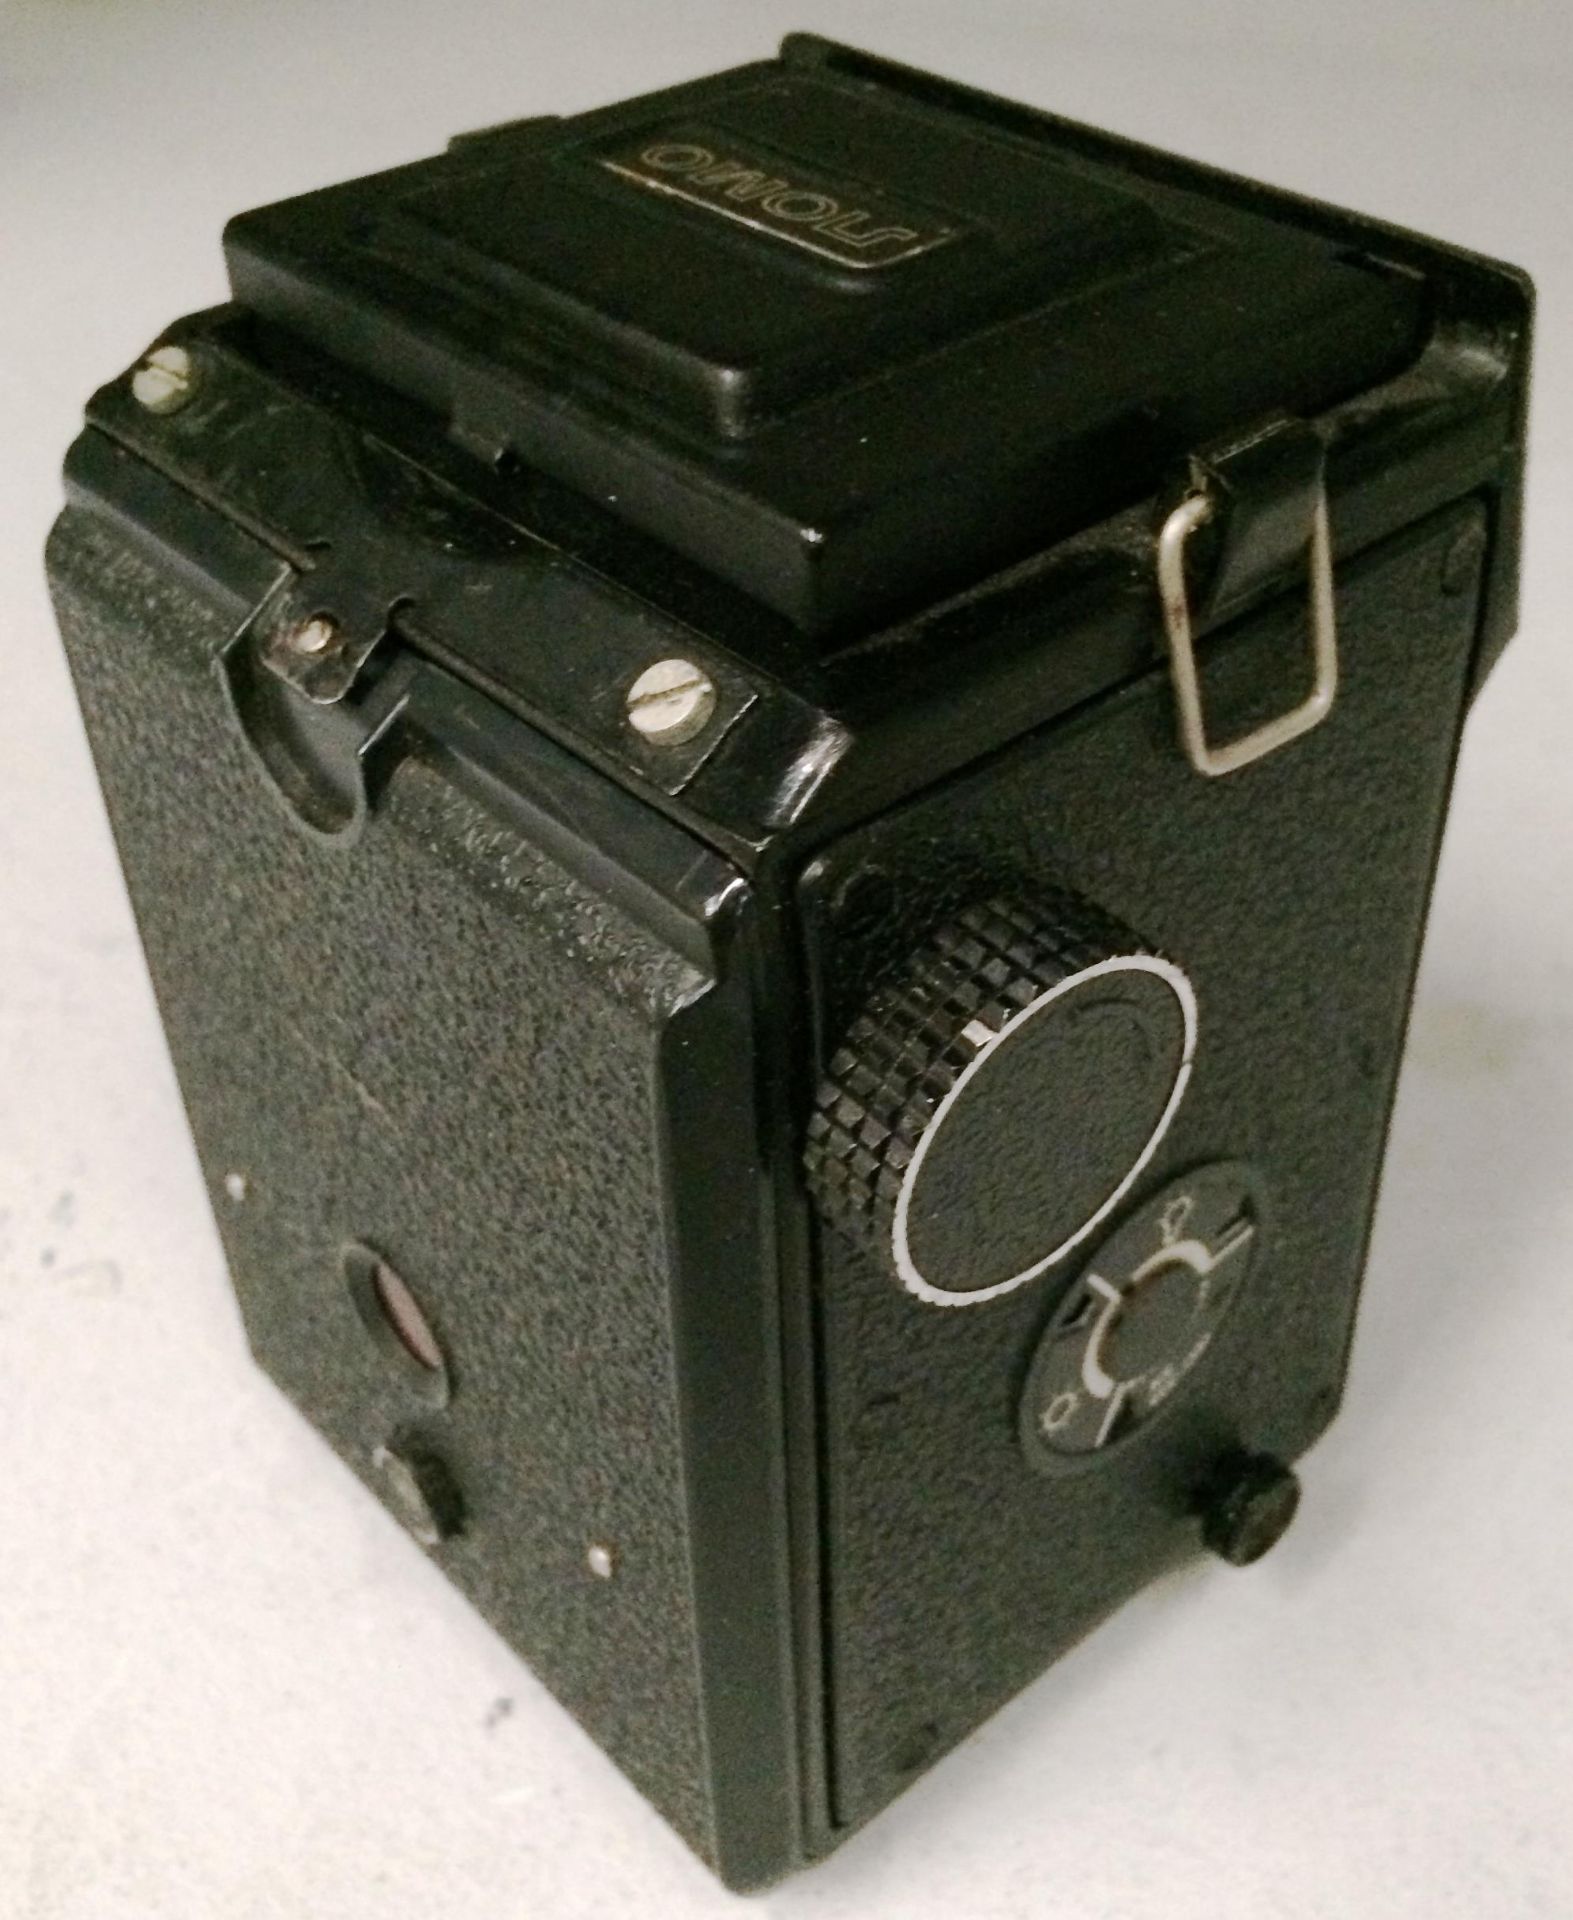 Lubitel 166 B camera with a Nomo T-22 4.5/7. - Image 3 of 4